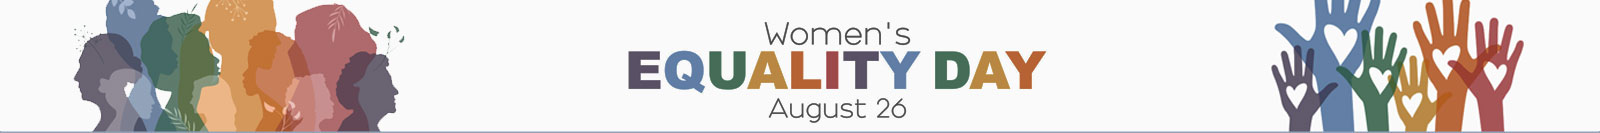 Women's Equality Day is August 26